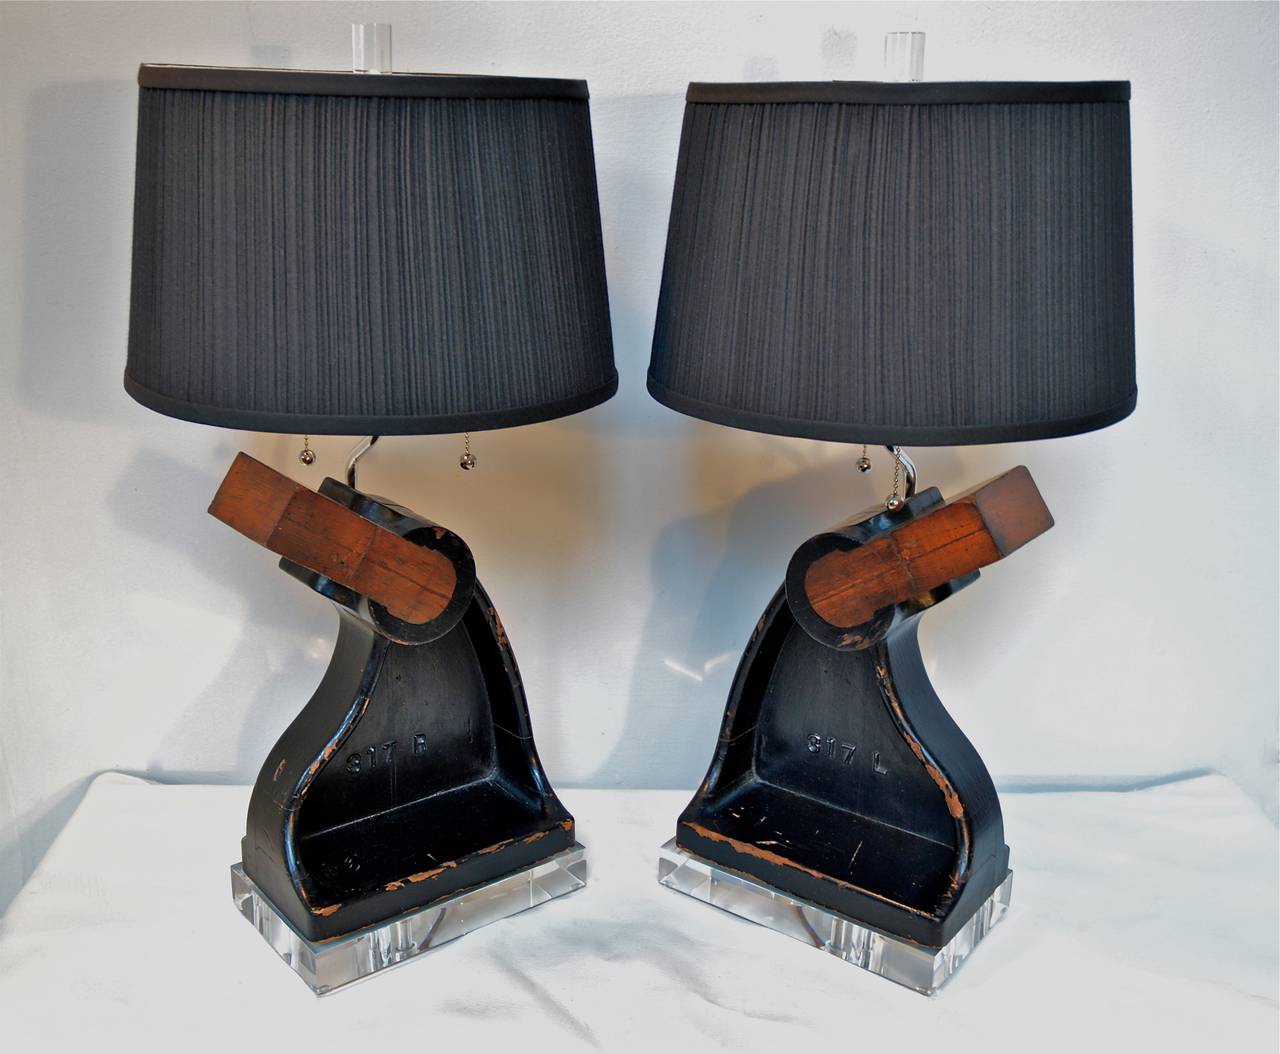 Fantastic and truly one of a kind pair of Industrial foundry molds custom fitted into lamps. Labelled 